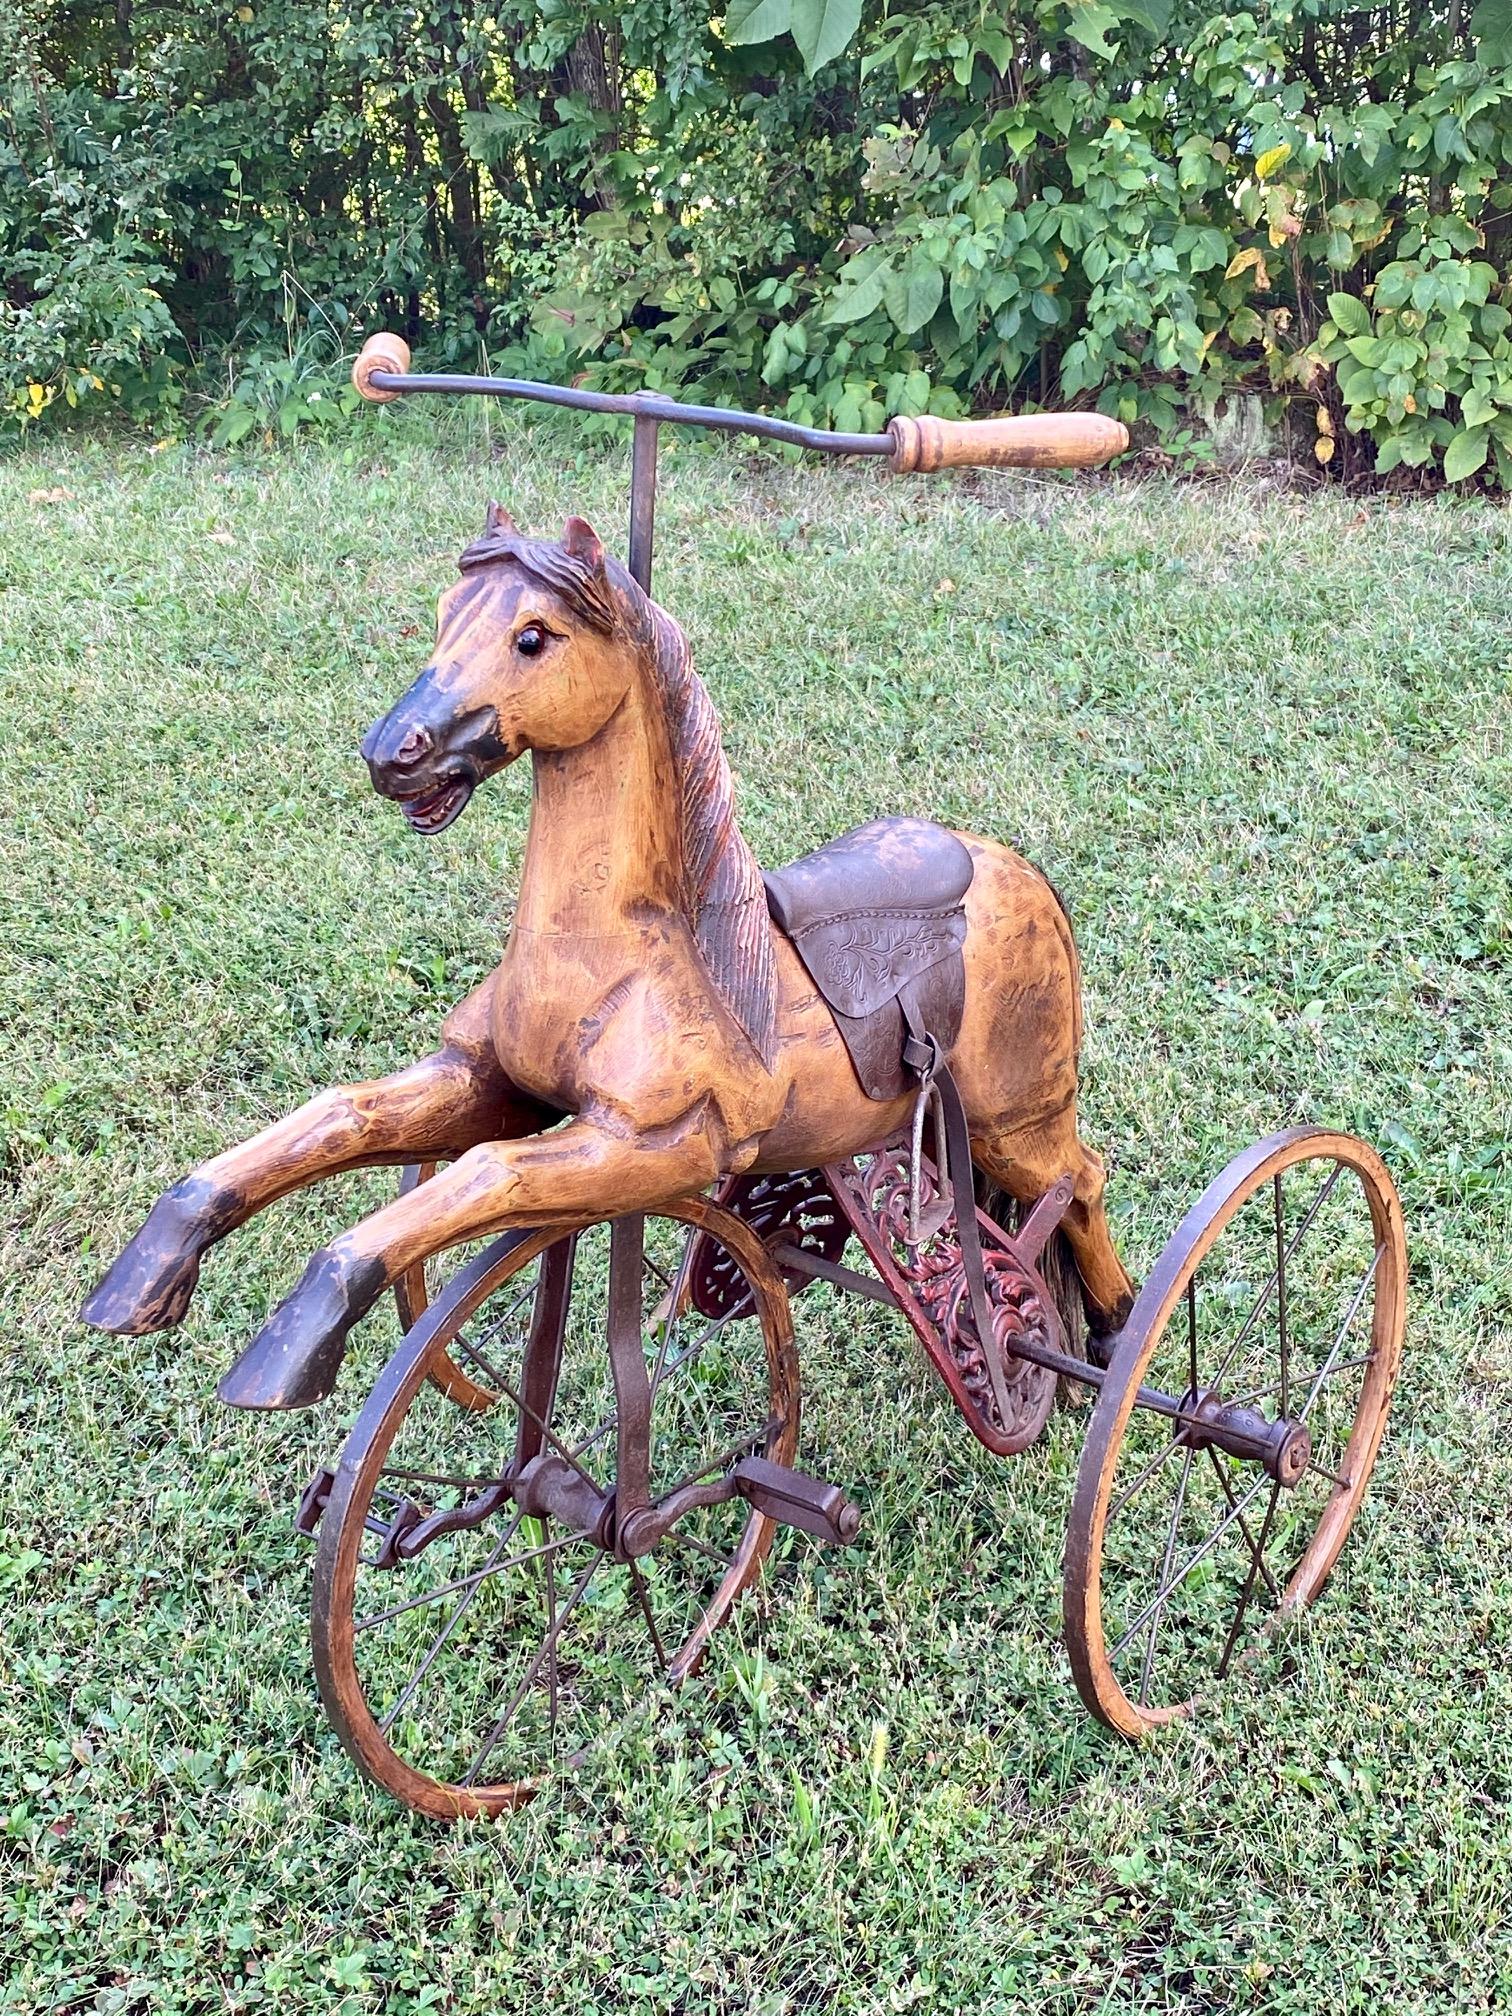 Philippine Charming Folk Art Child's Bicycle in the Shape of a Horse